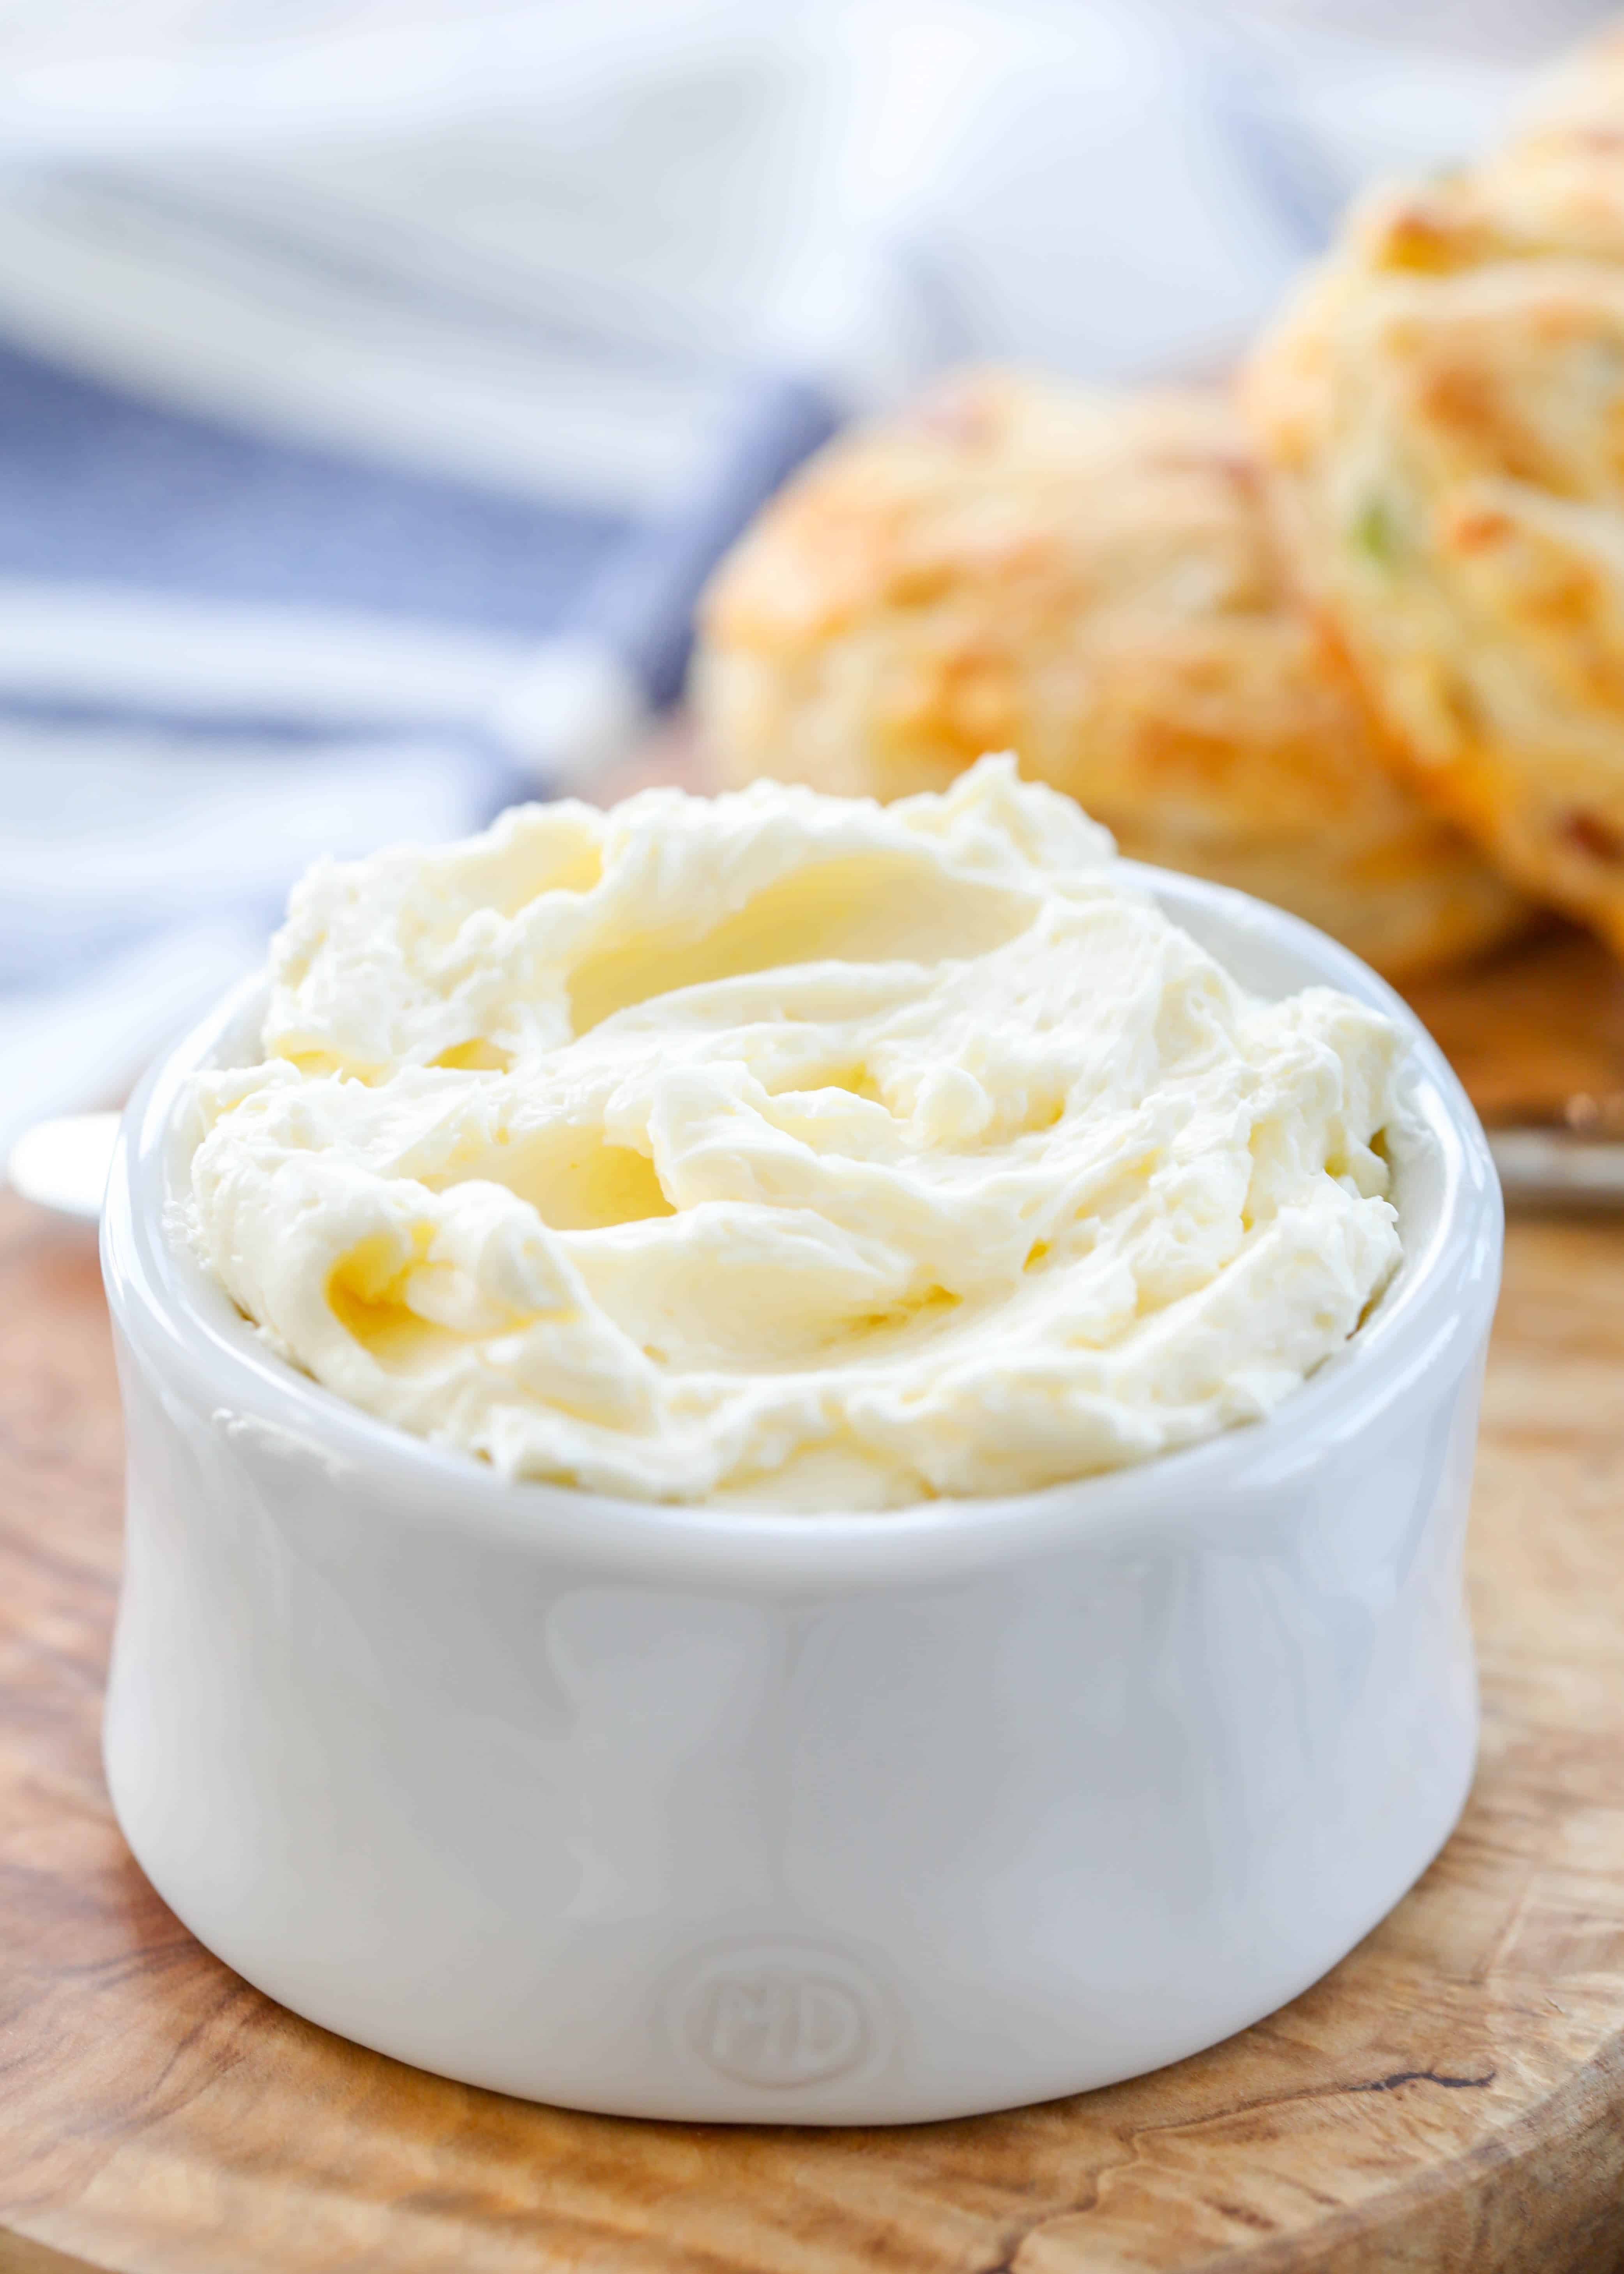 The No. 1 Way to Use Irish Butter, According to Our Test Kitchen